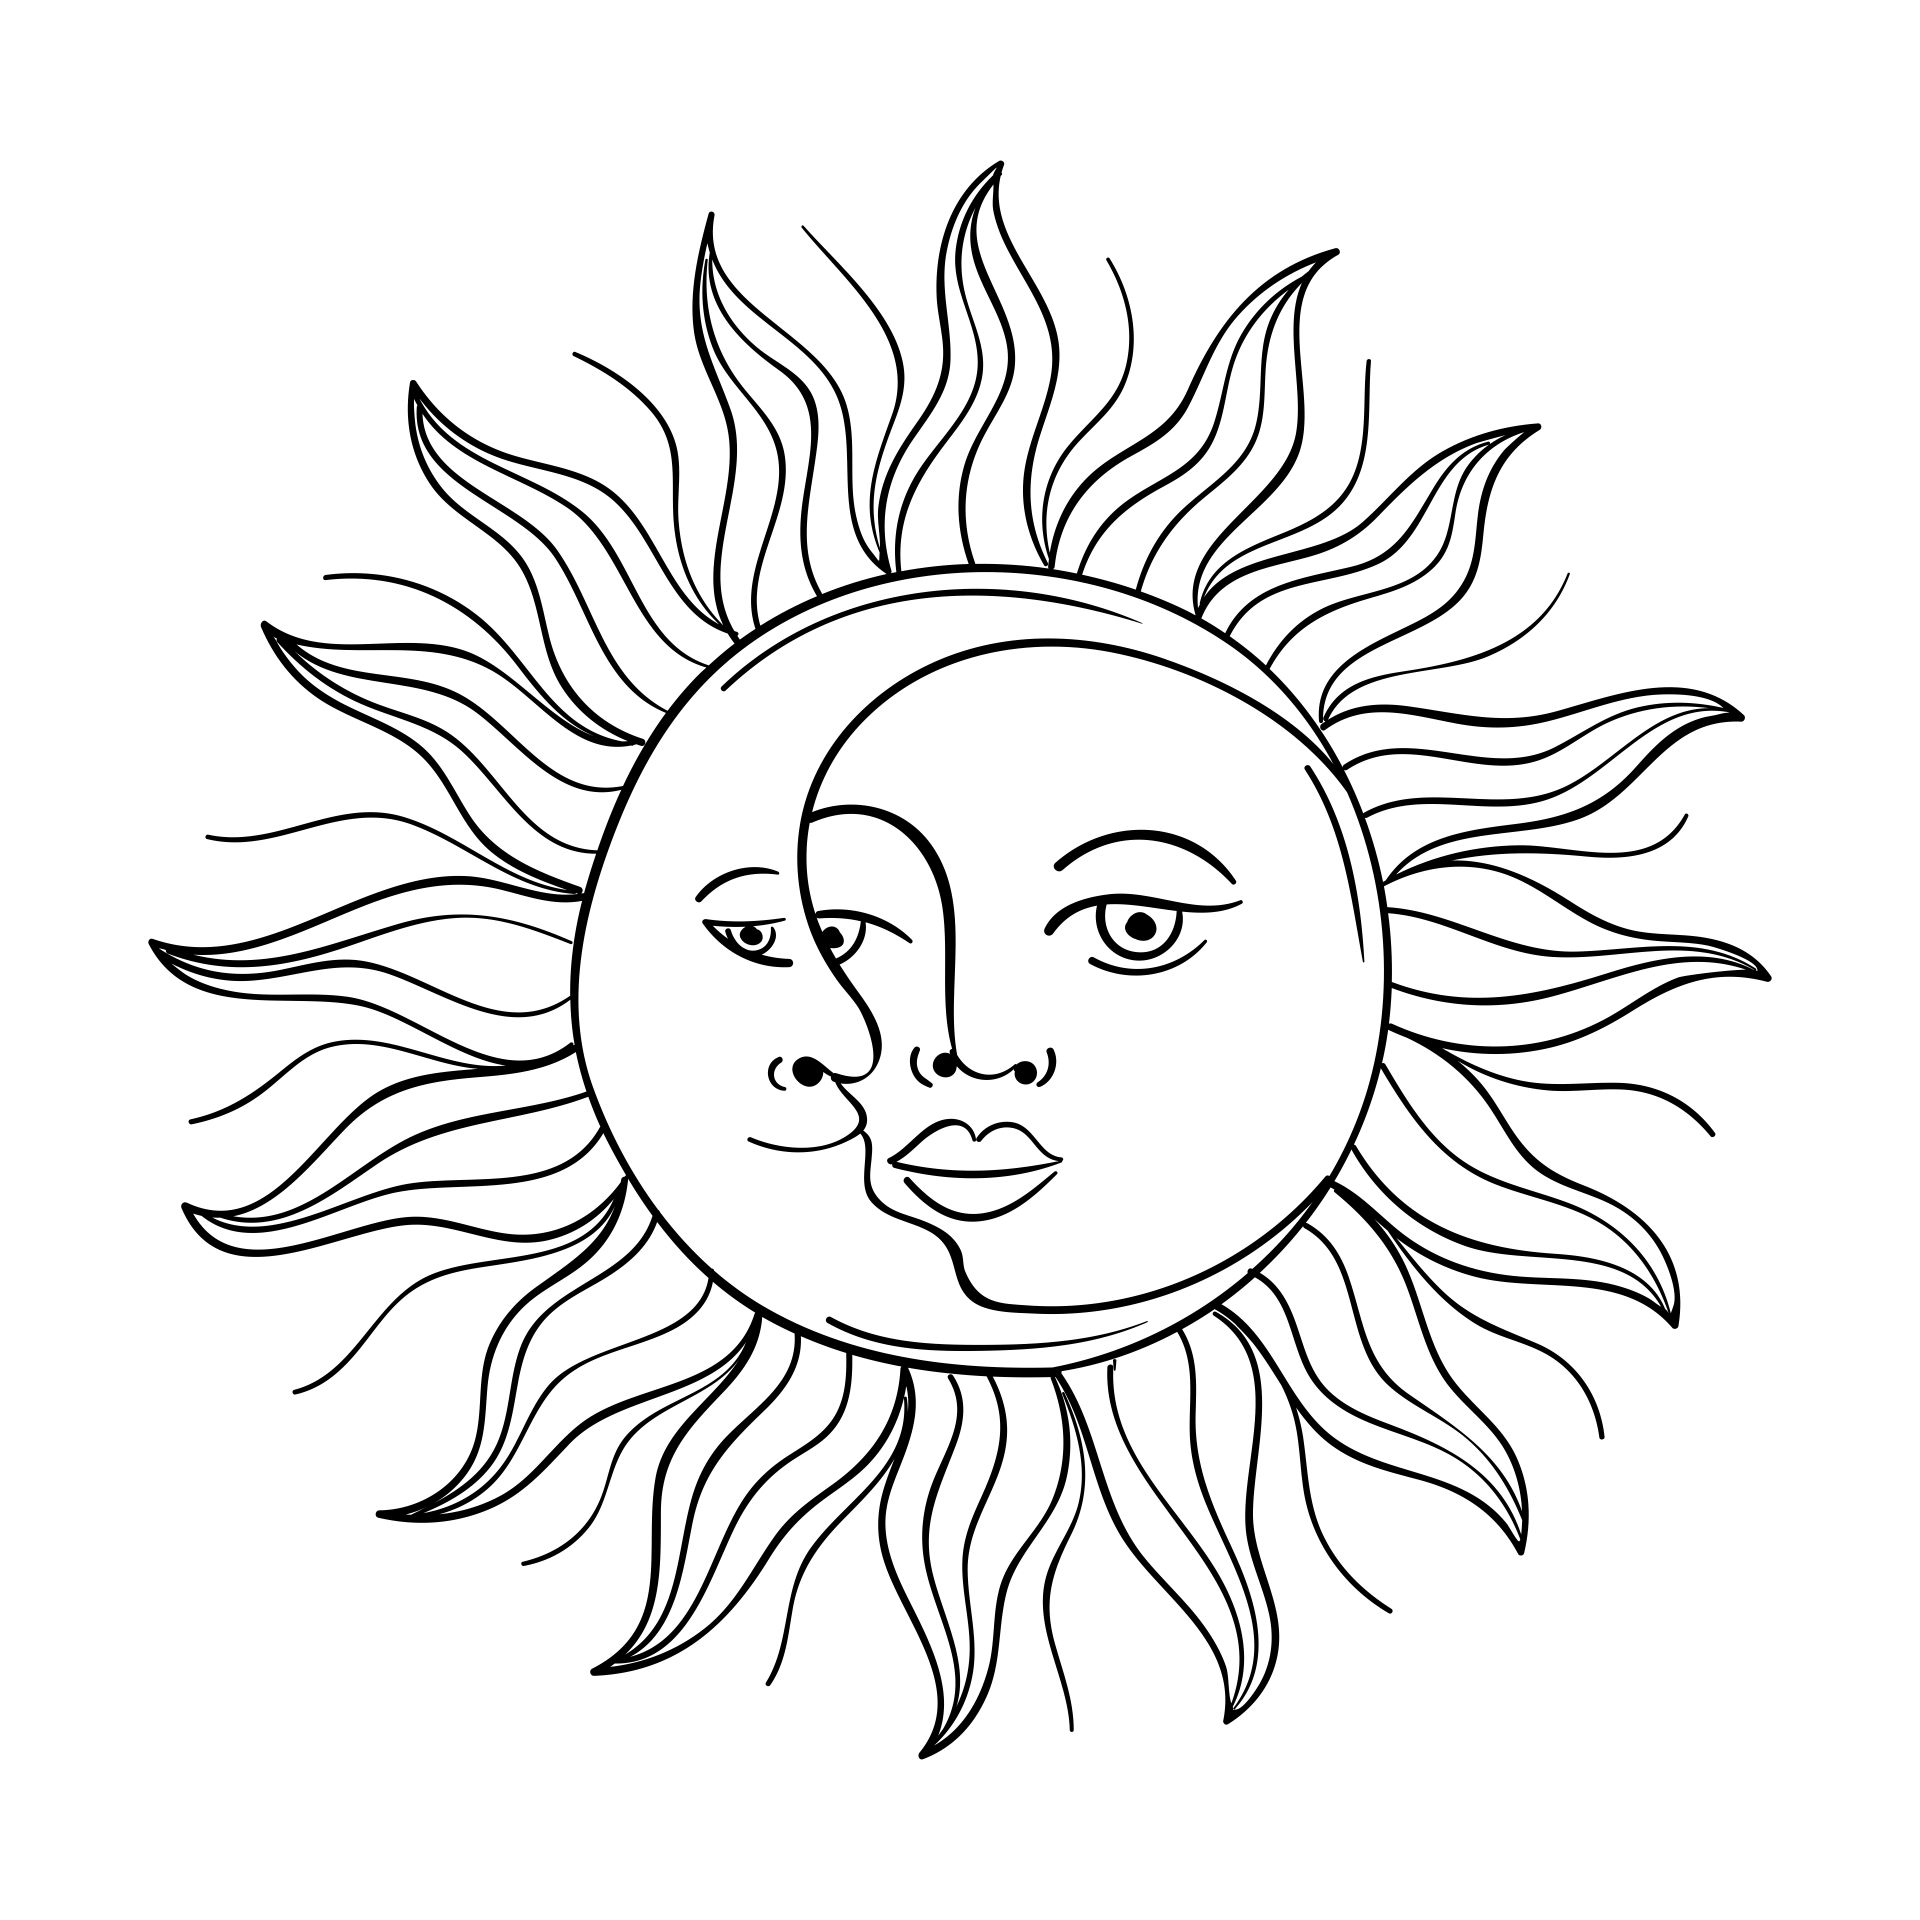 6 Best Images of Printable Sun And Moon Designs - Mandalas Coloring ...